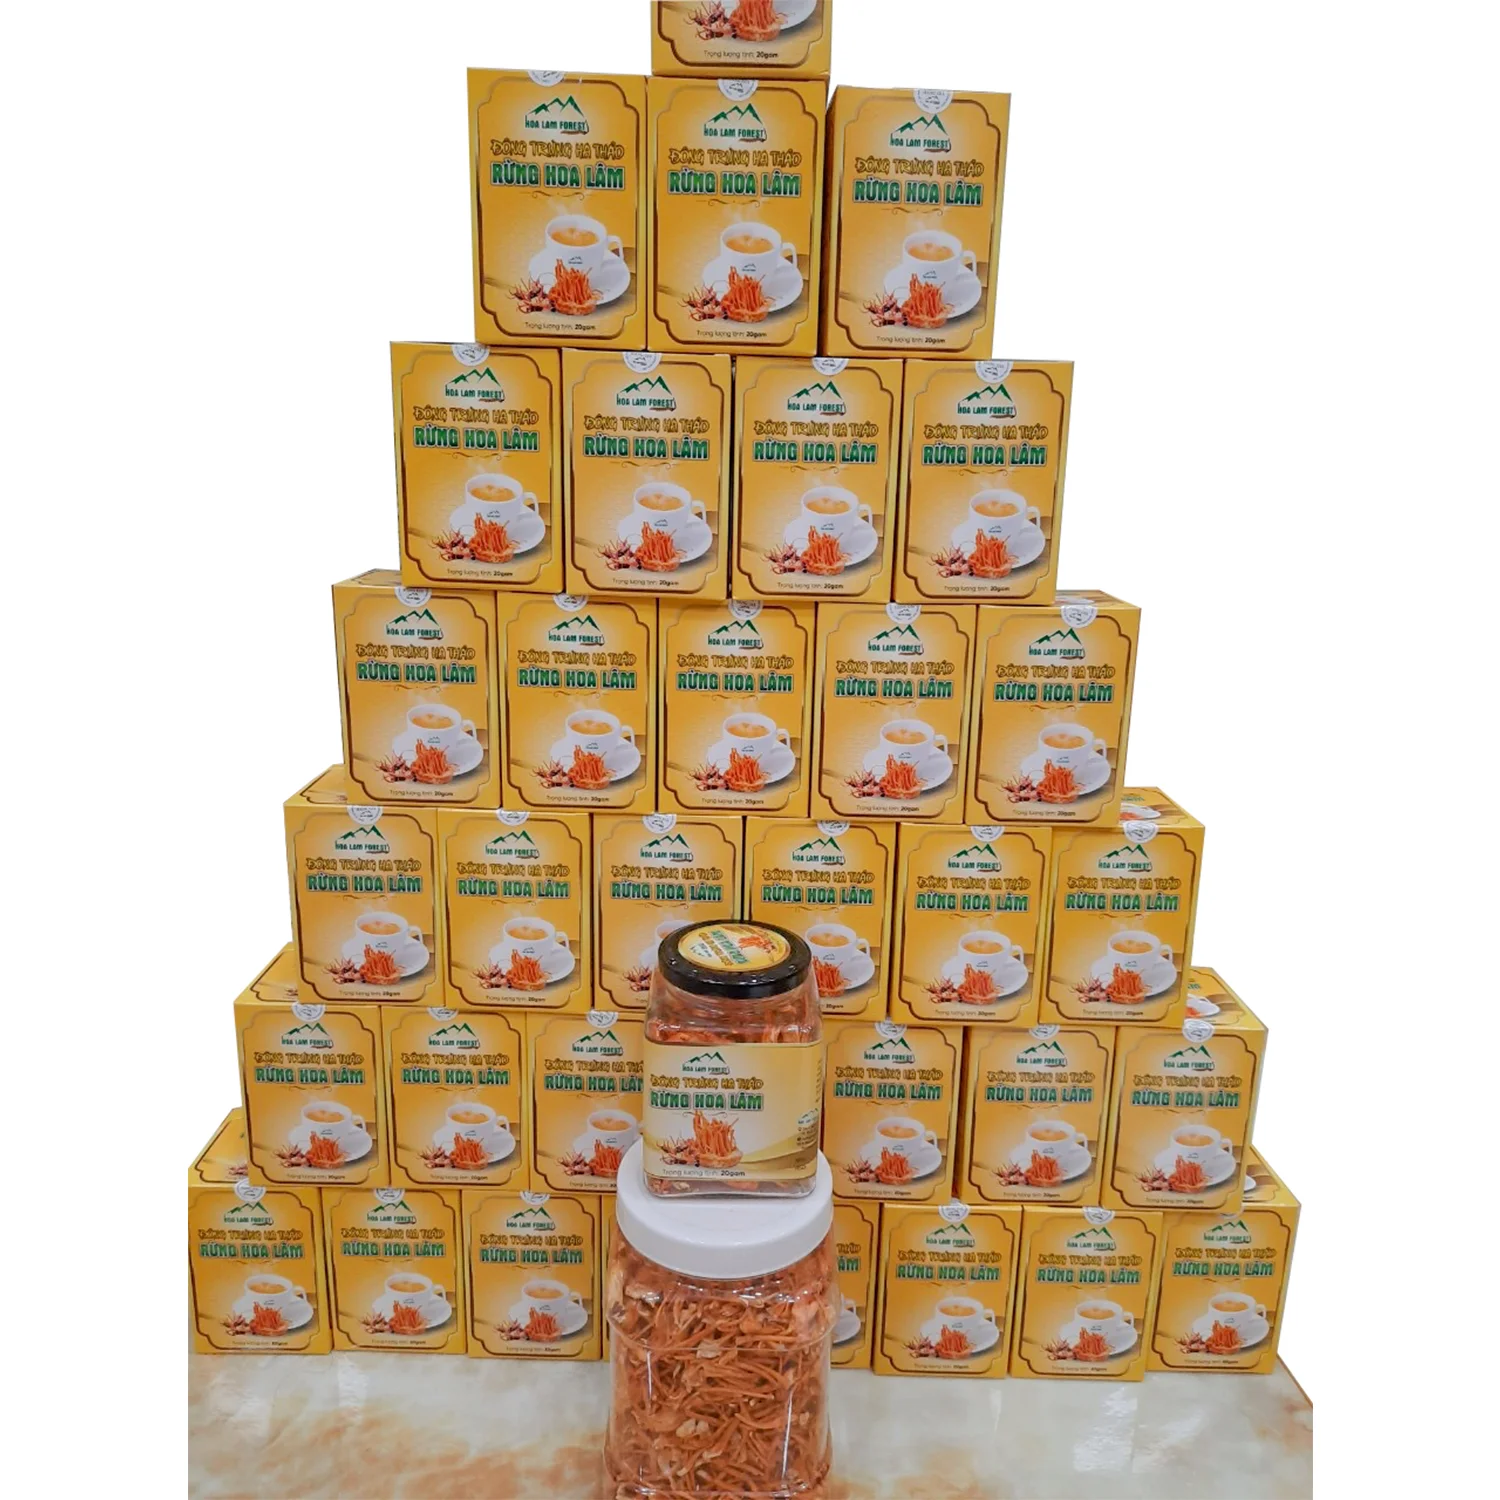 Cordyceps Militaris  Healthy Product 100% Natural Herbal High Quality Product Good For Health Providing Energy OEM Private Label